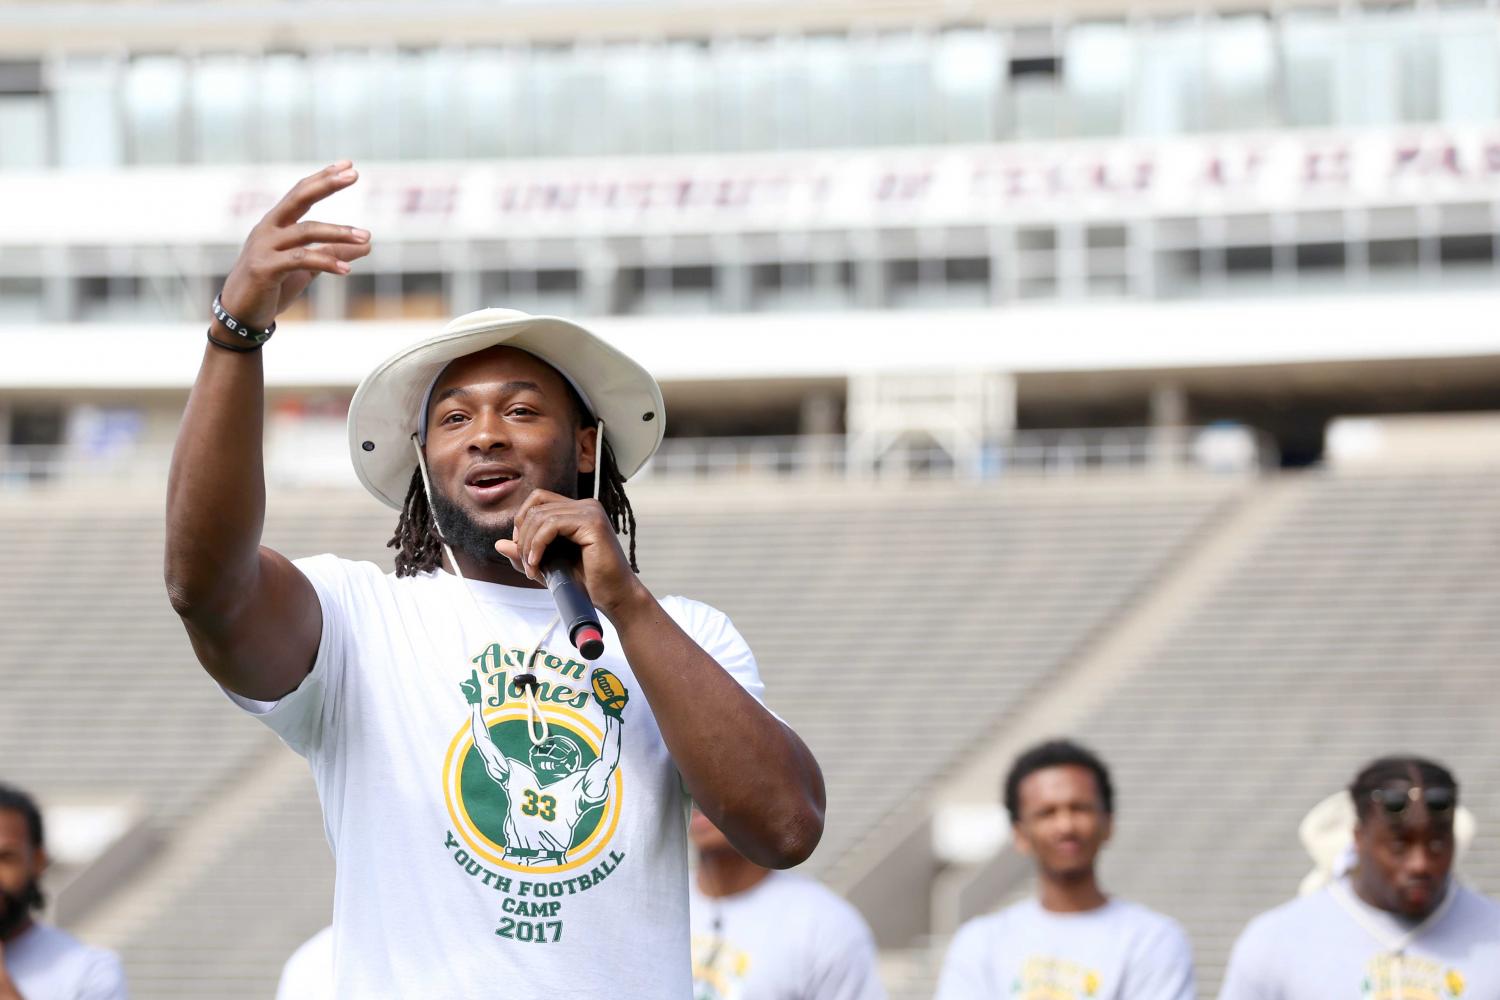 Aaron Jones Youth Skills Camp saw over 1,200 attendees throughout the two days of the camp. 